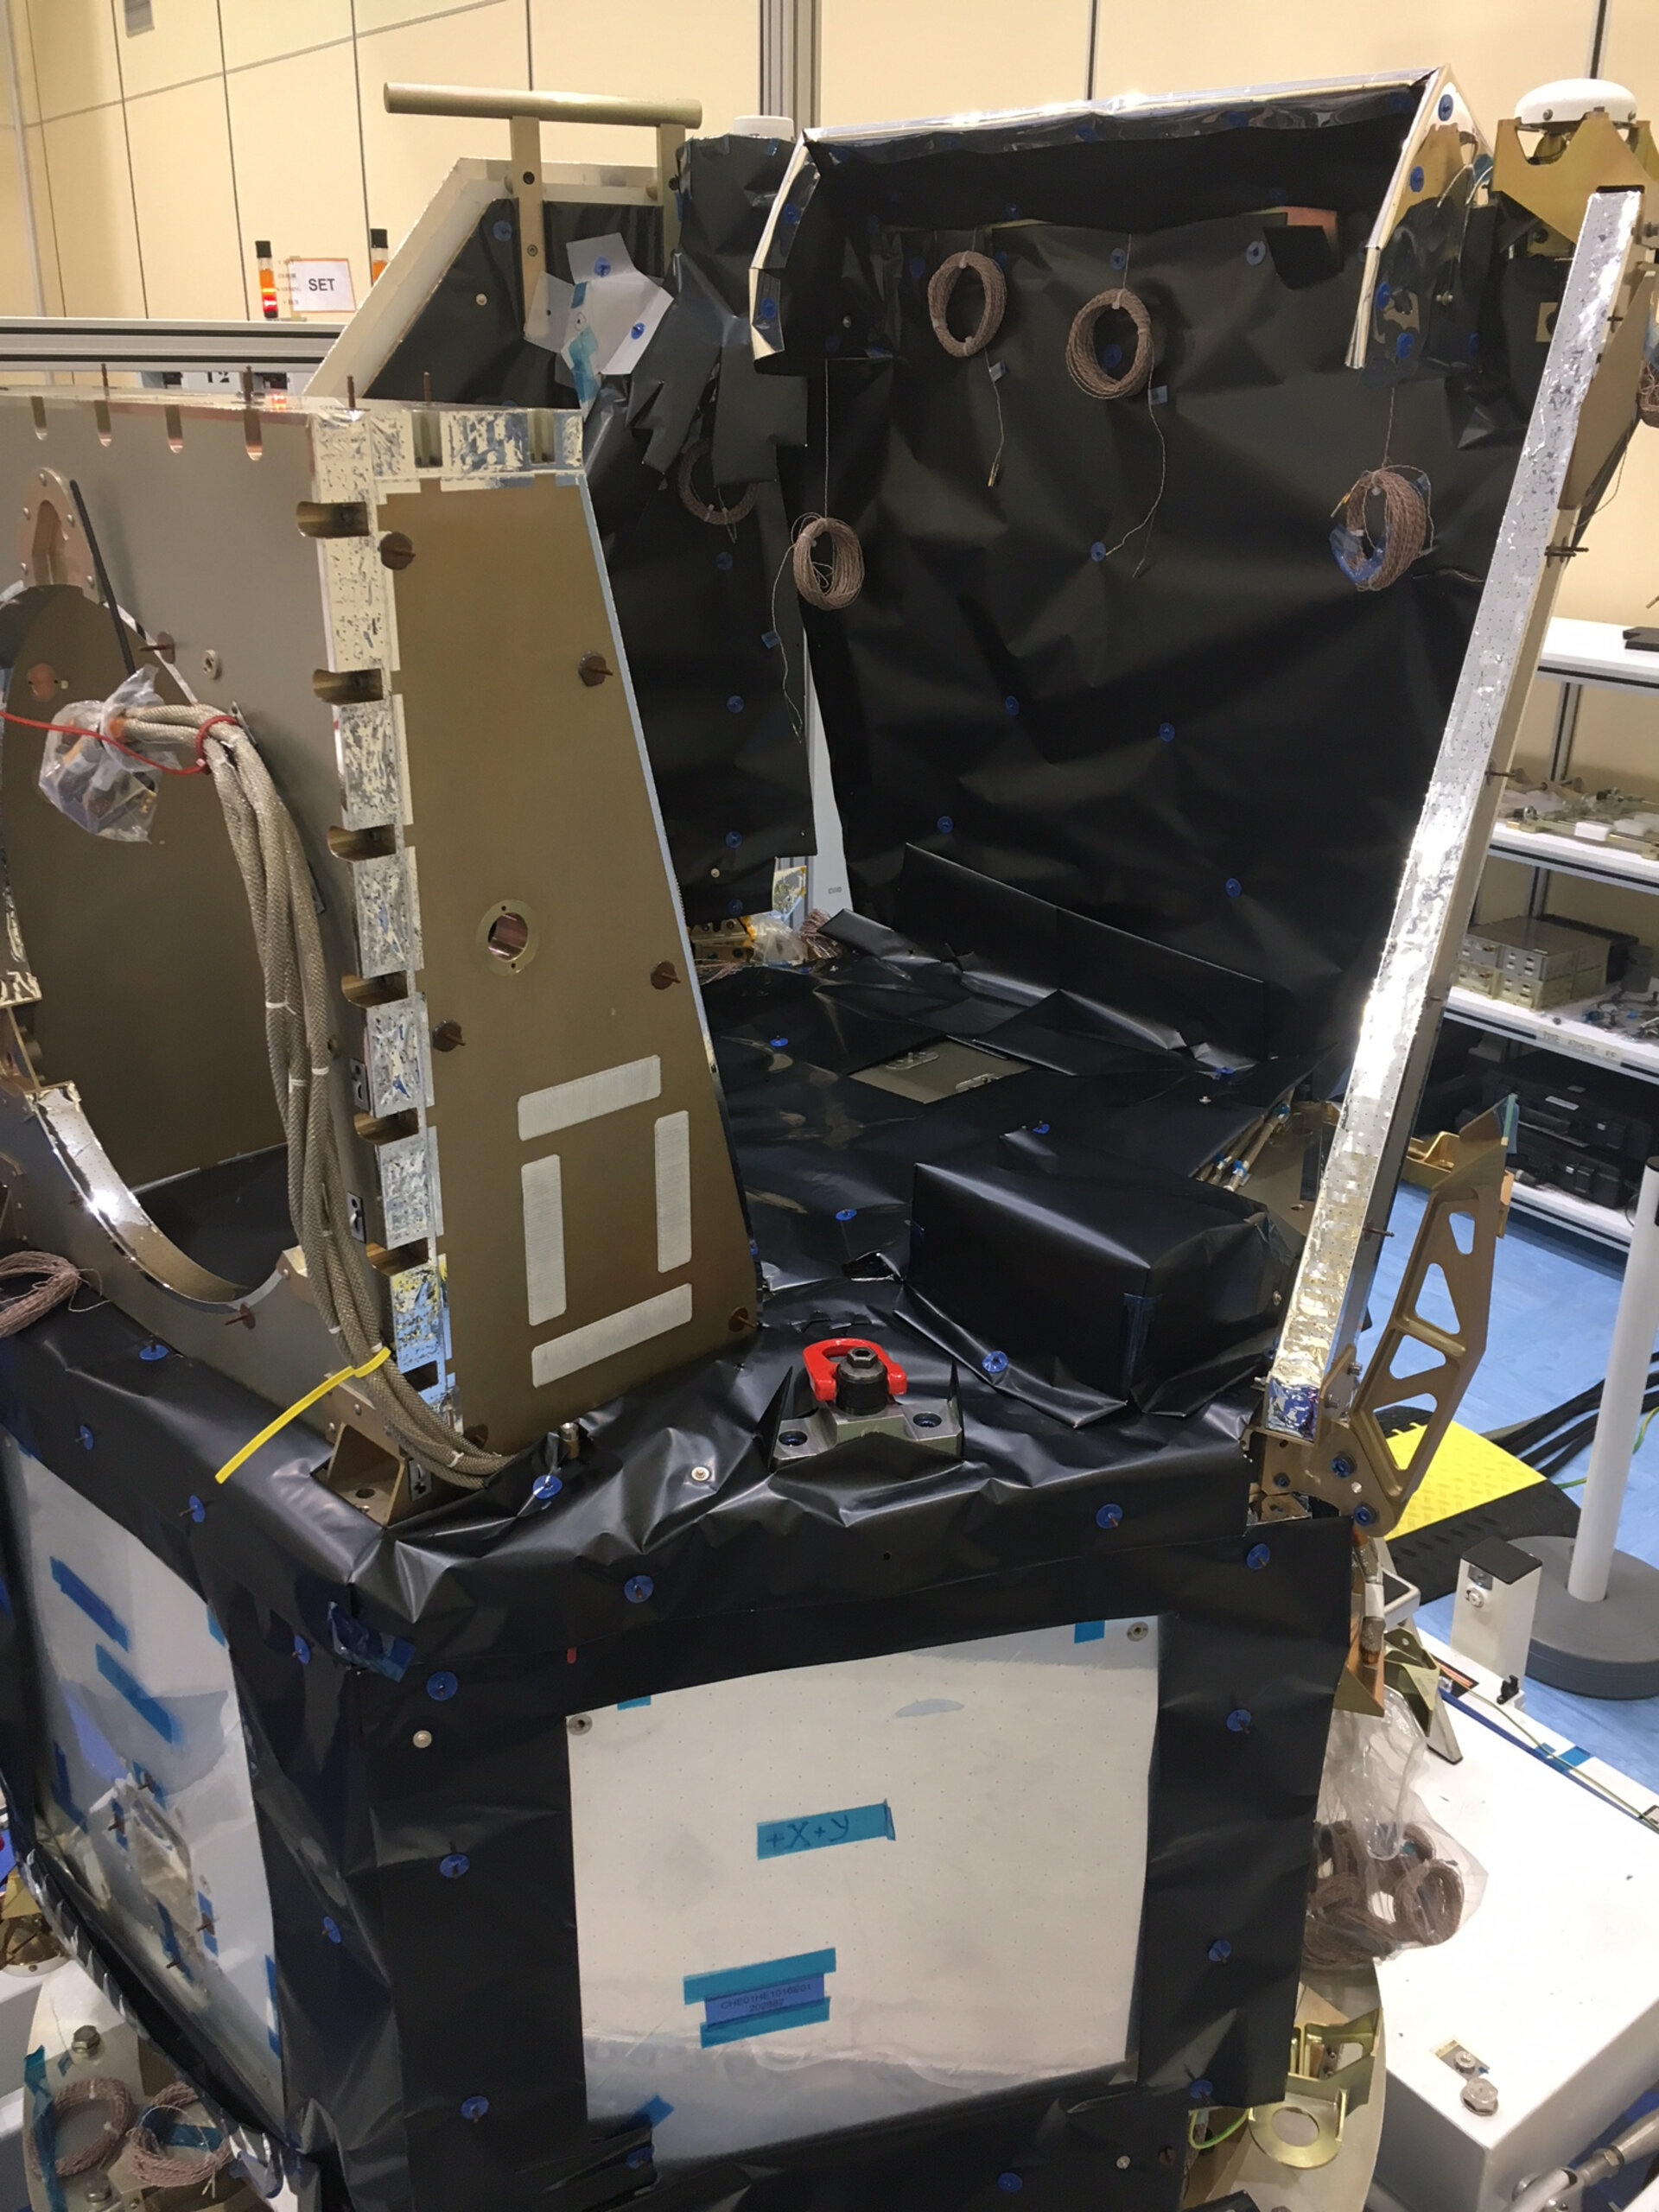 CHEOPS spacecraft platform before integration of the science payload